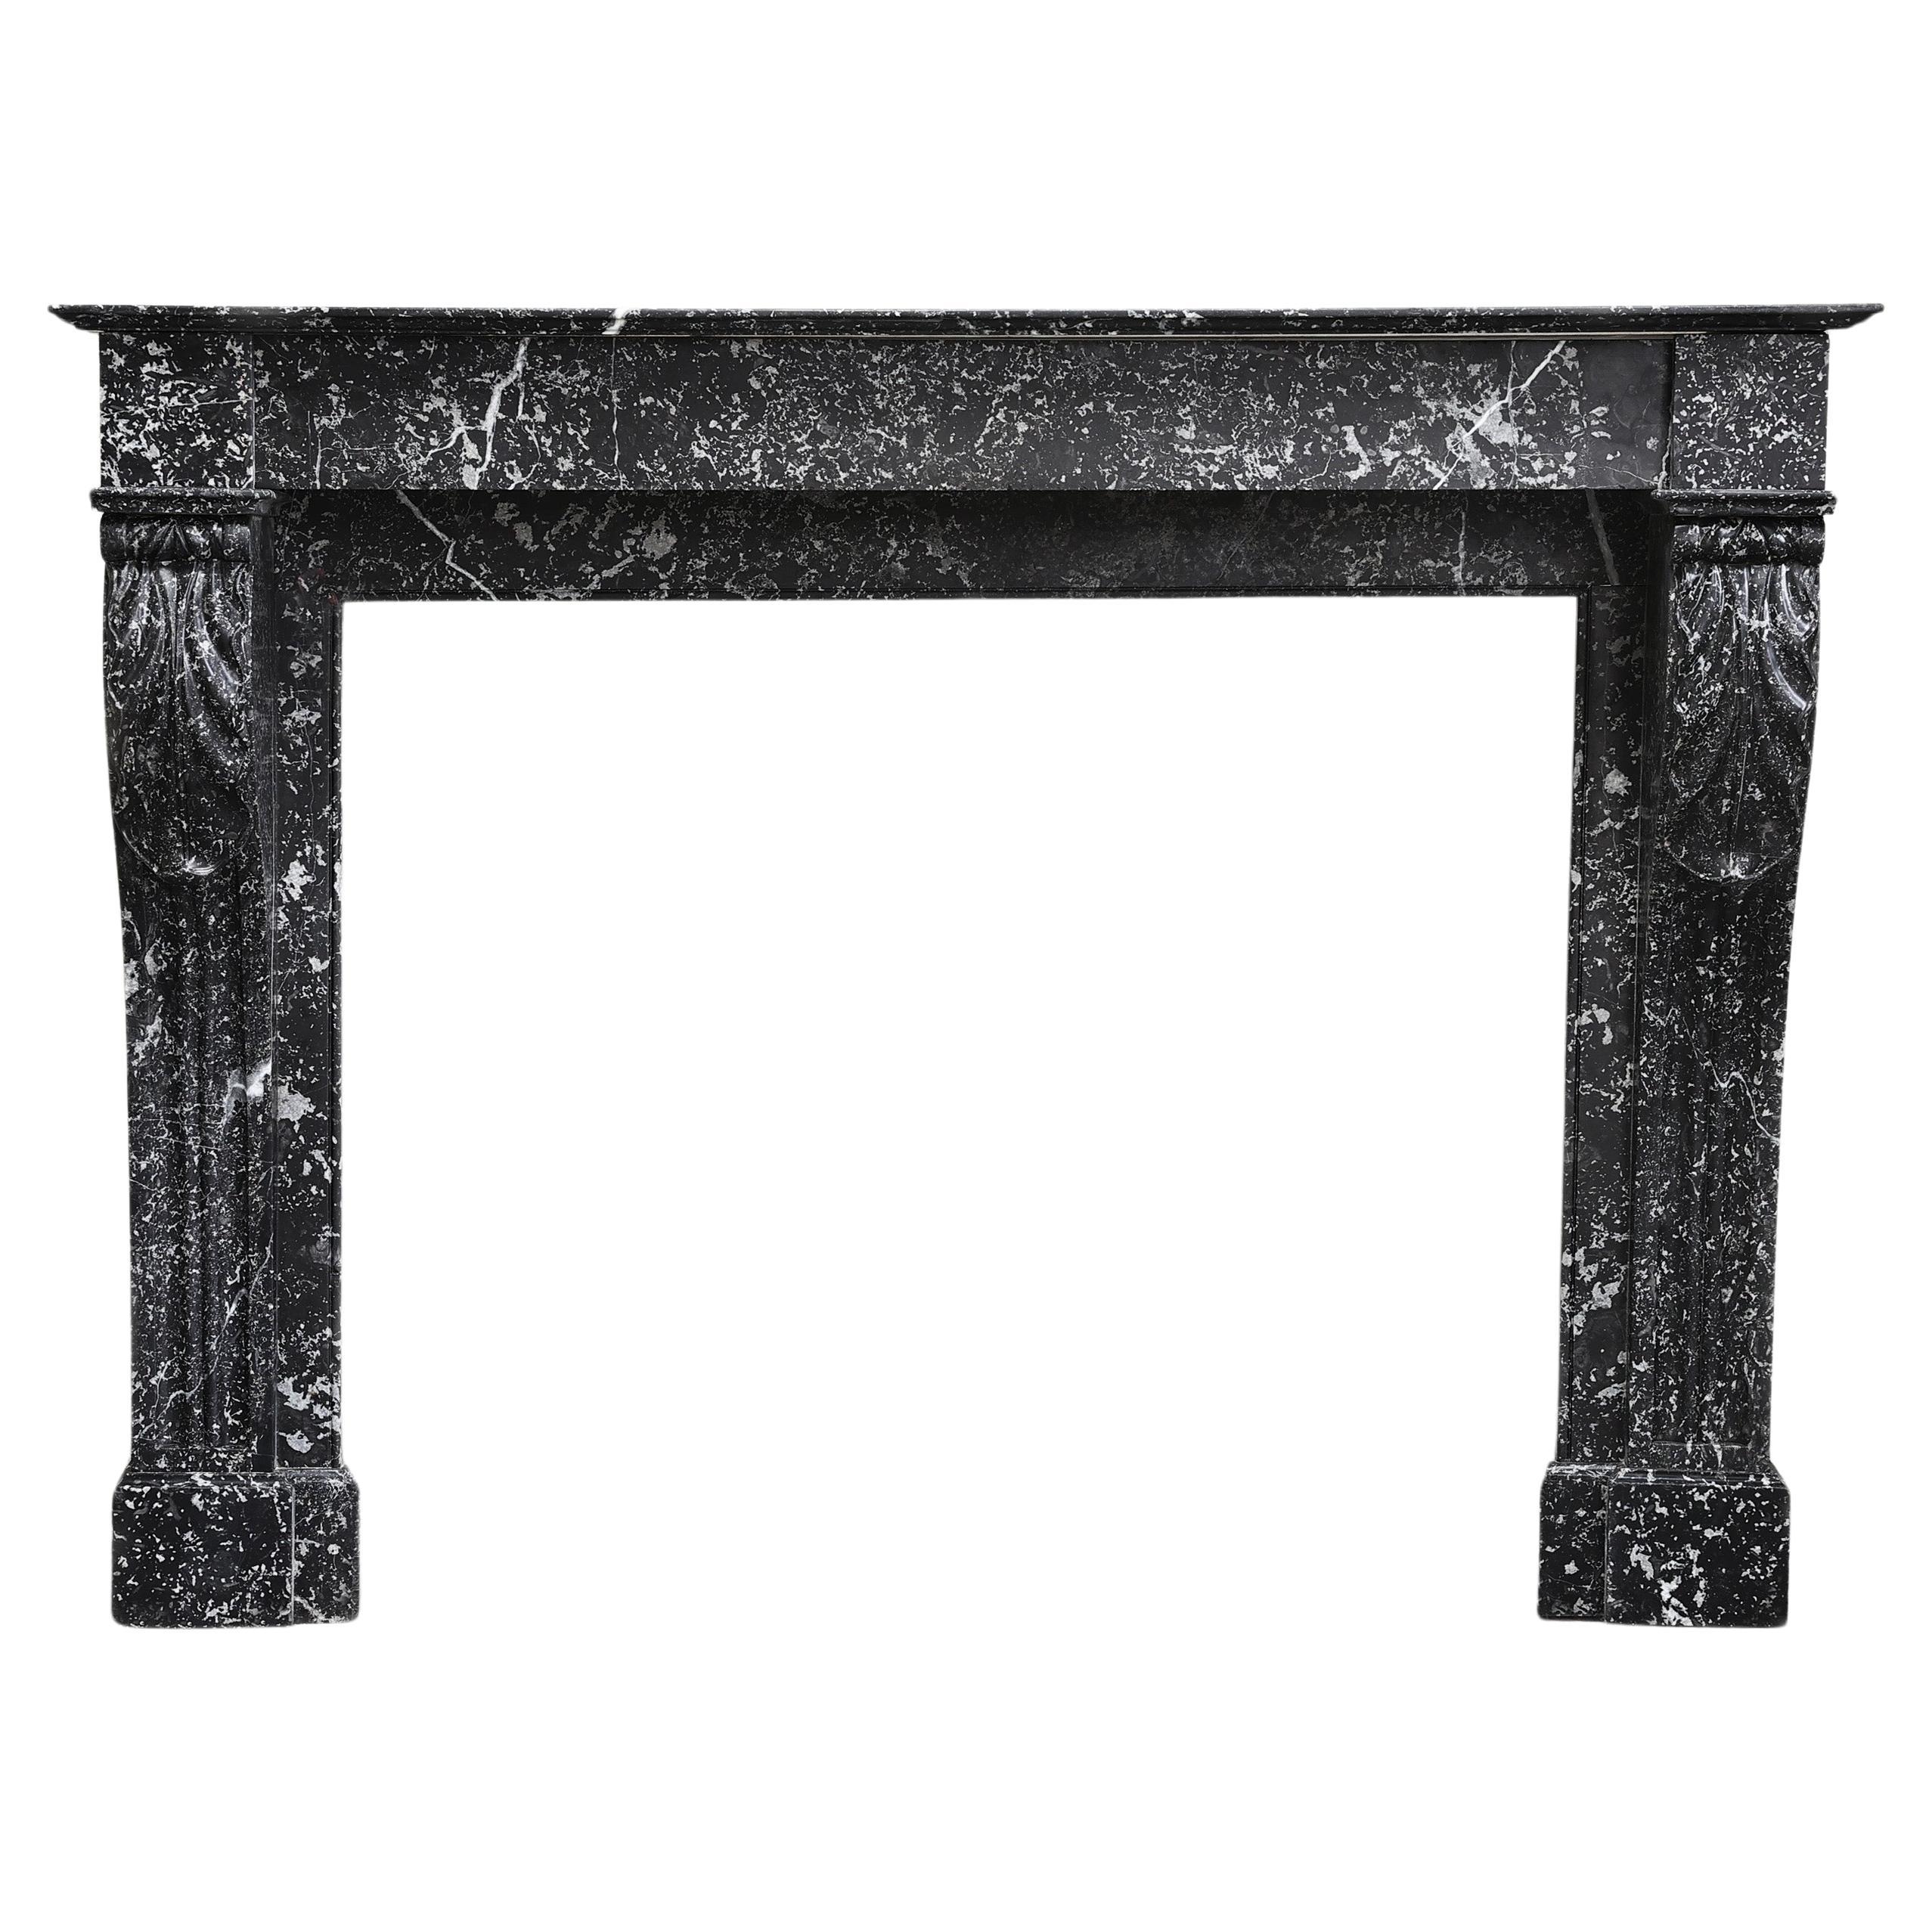 Beautiful antique mantelpiece made of black marble with white veins in the style For Sale